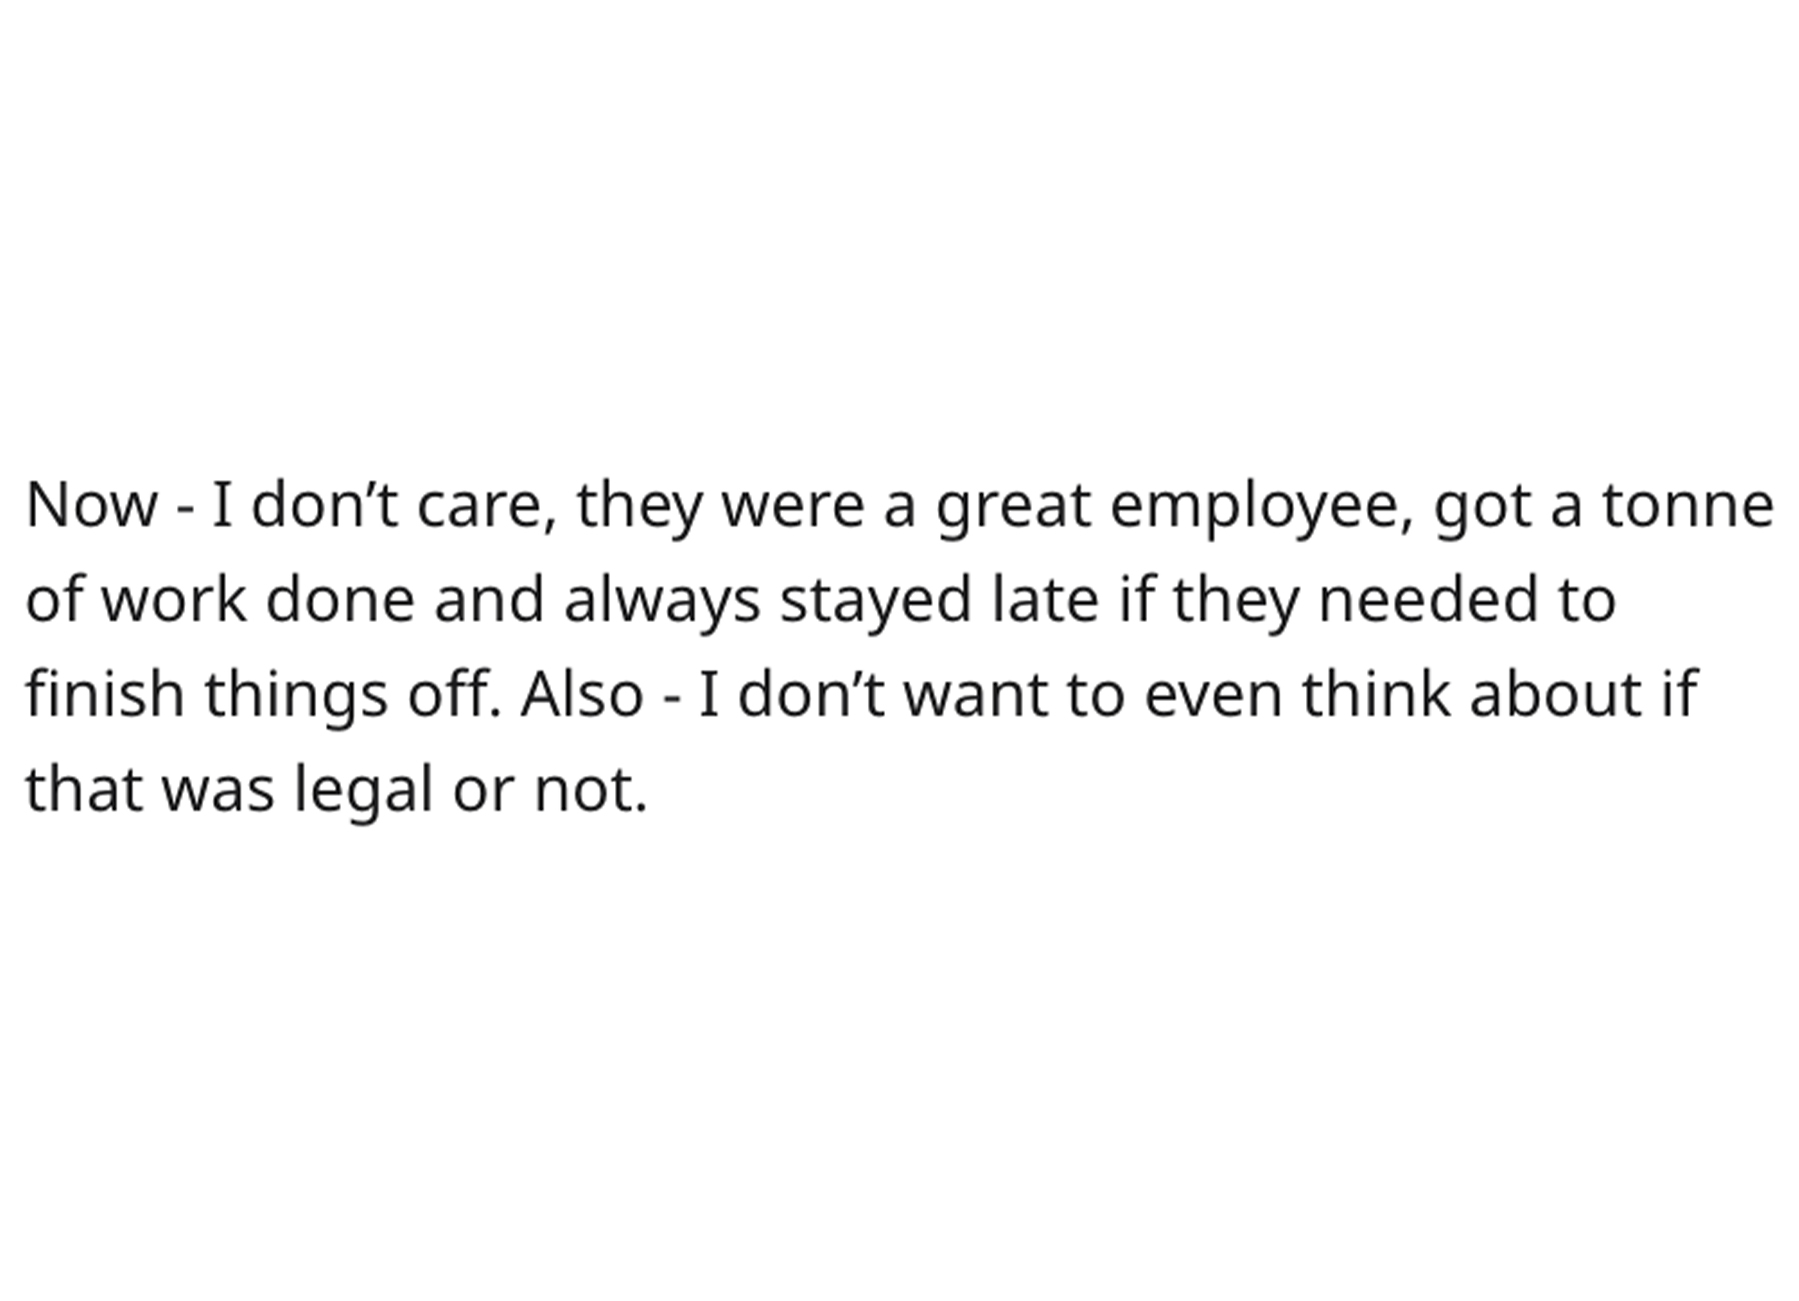 Supervisor Sticks it to Cheap Boss - document - Now I don't care, they were a great employee, got a tonne of work done and always stayed late if they needed to finish things off. Also I don't want to even think about if that was legal or not.